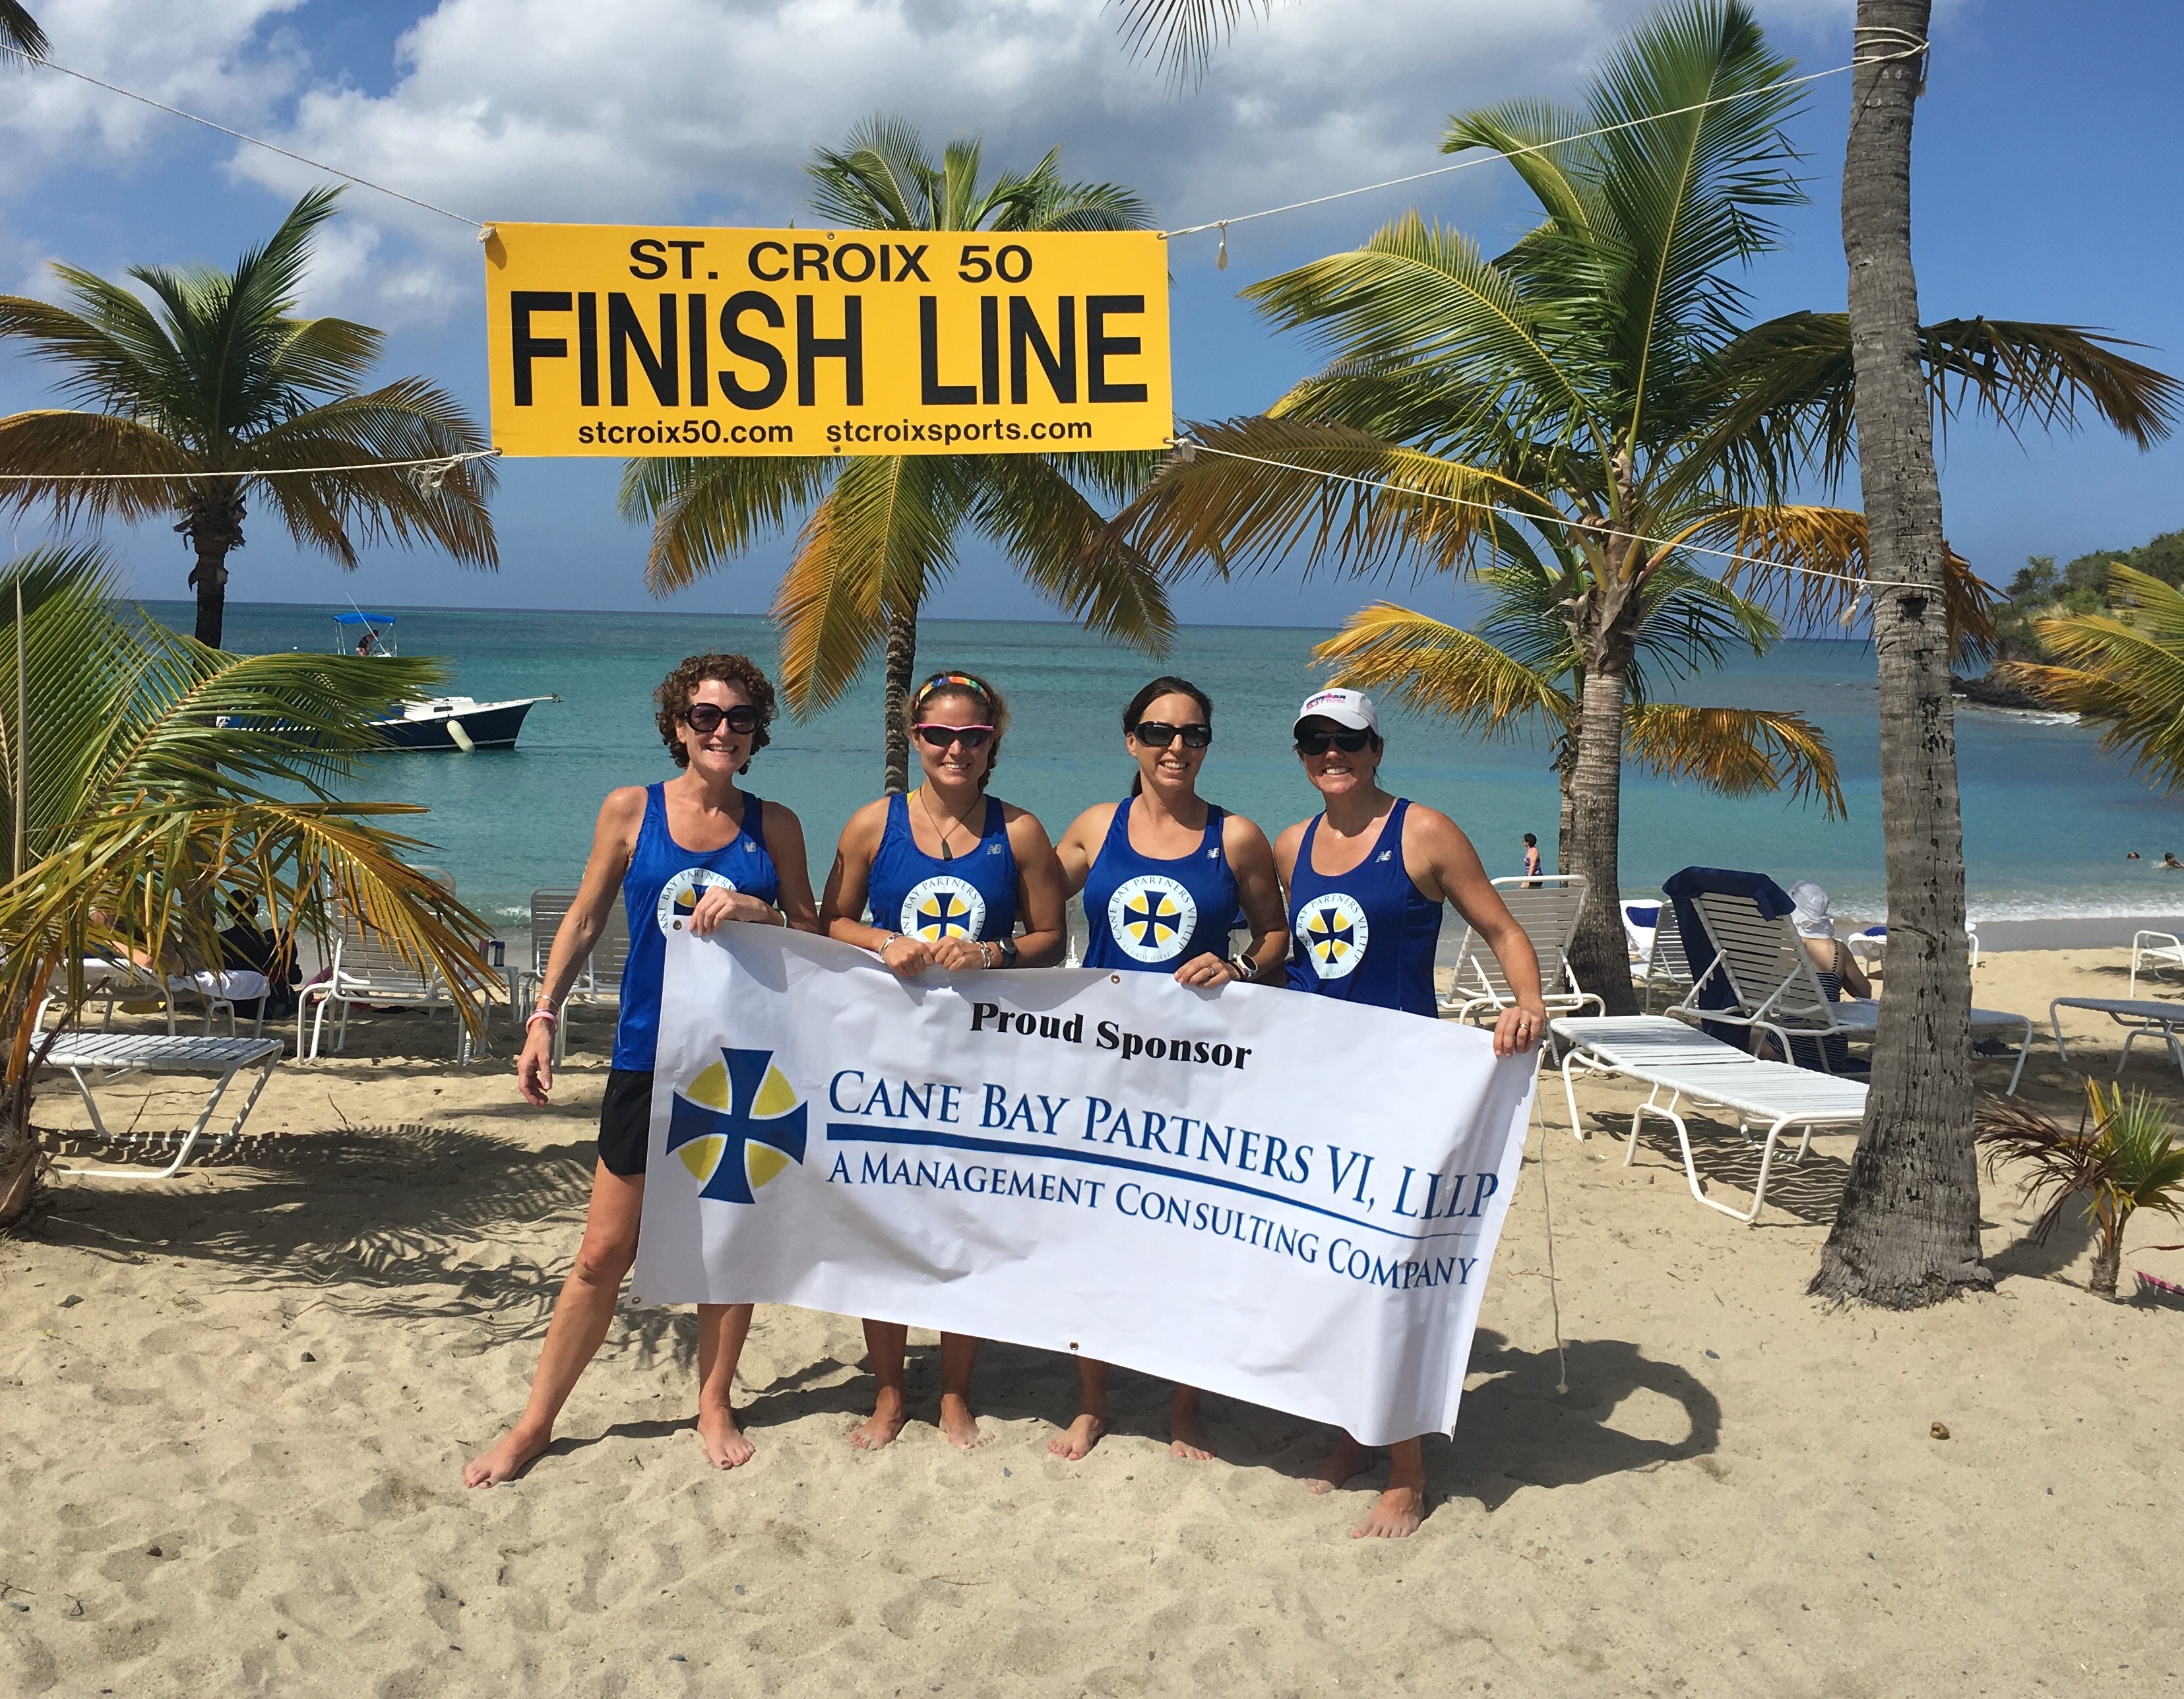 Team members sponsored by Cane Bay Partners VI, LLLP  include St. Croix residents (left to right) Colleen Chin, Robin Seila, Esther Ellis and Julie Sommer pose by the finish line on Mermaid Beach at T